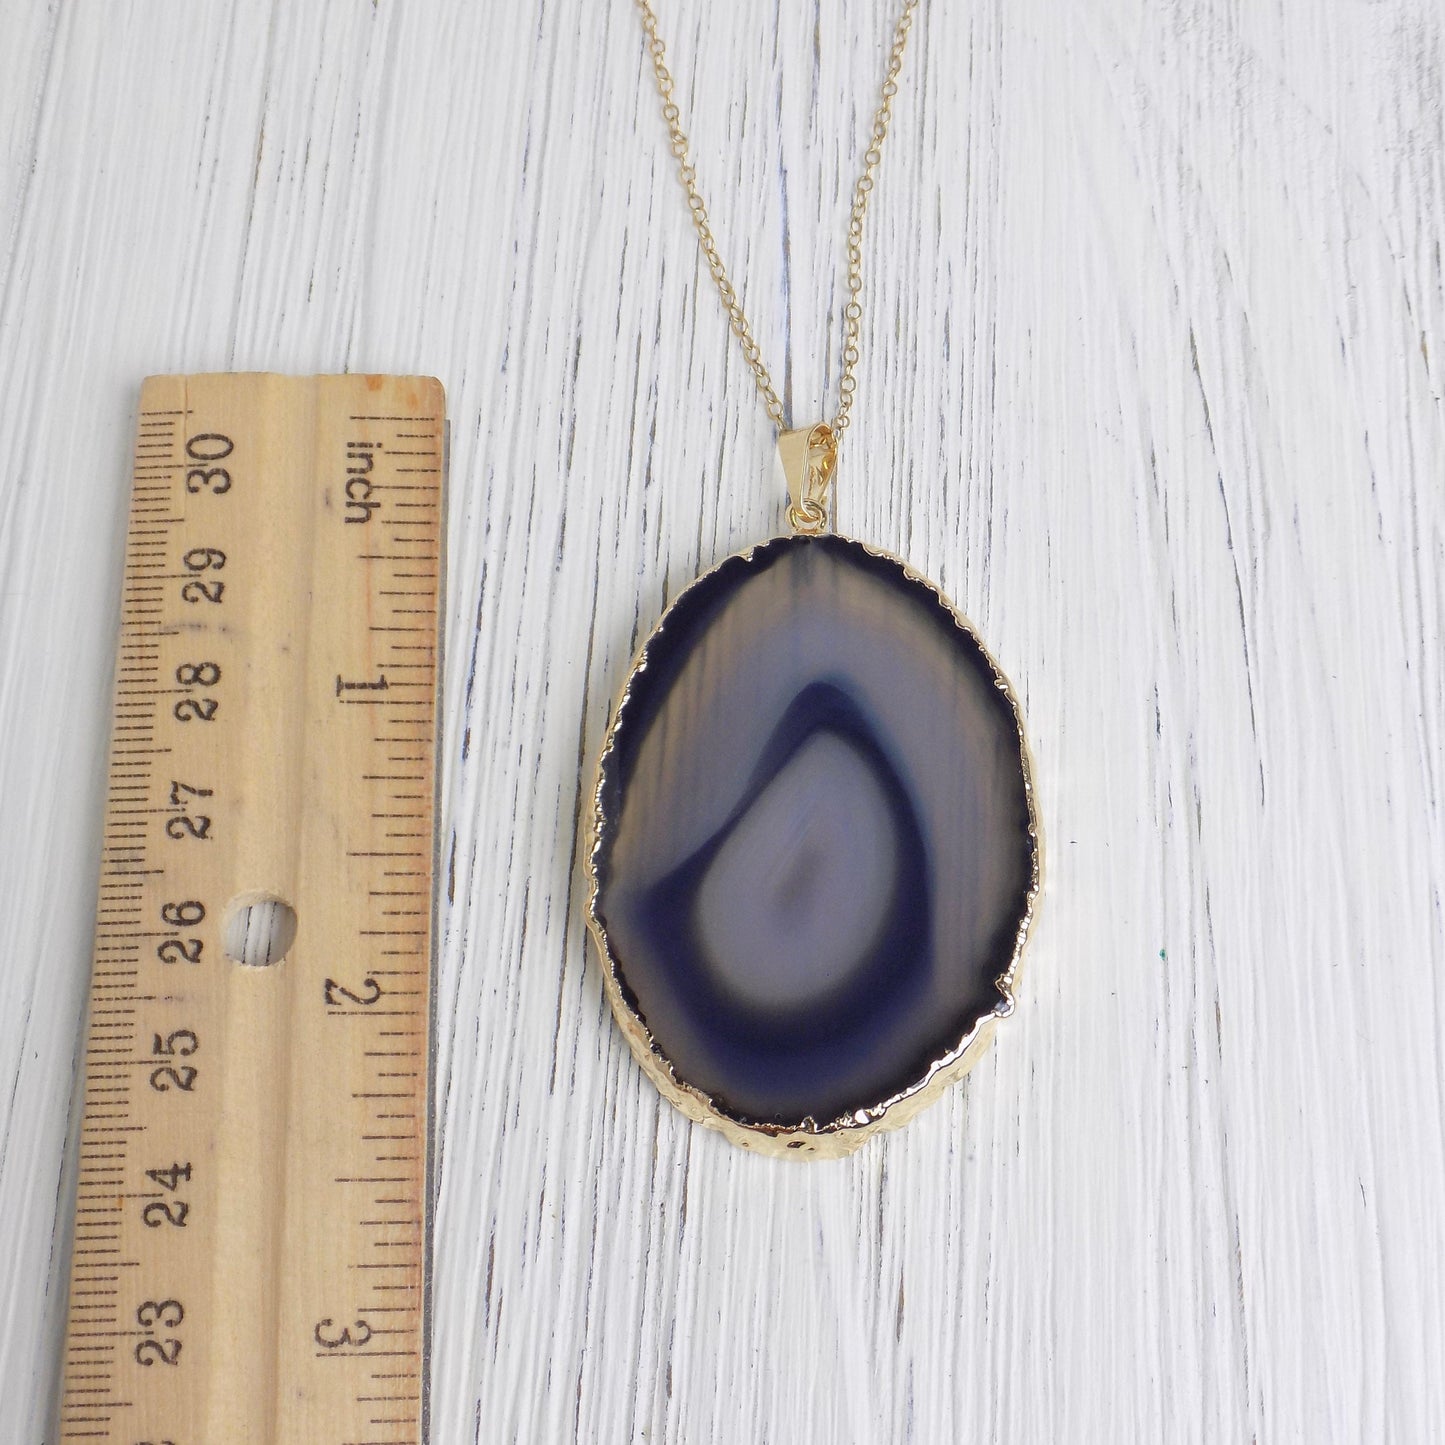 Unique Crystal Necklace, Black Agate Necklace Gold, Long Slice Pendant Necklaces Women's, Gifts For Mom, G14-208